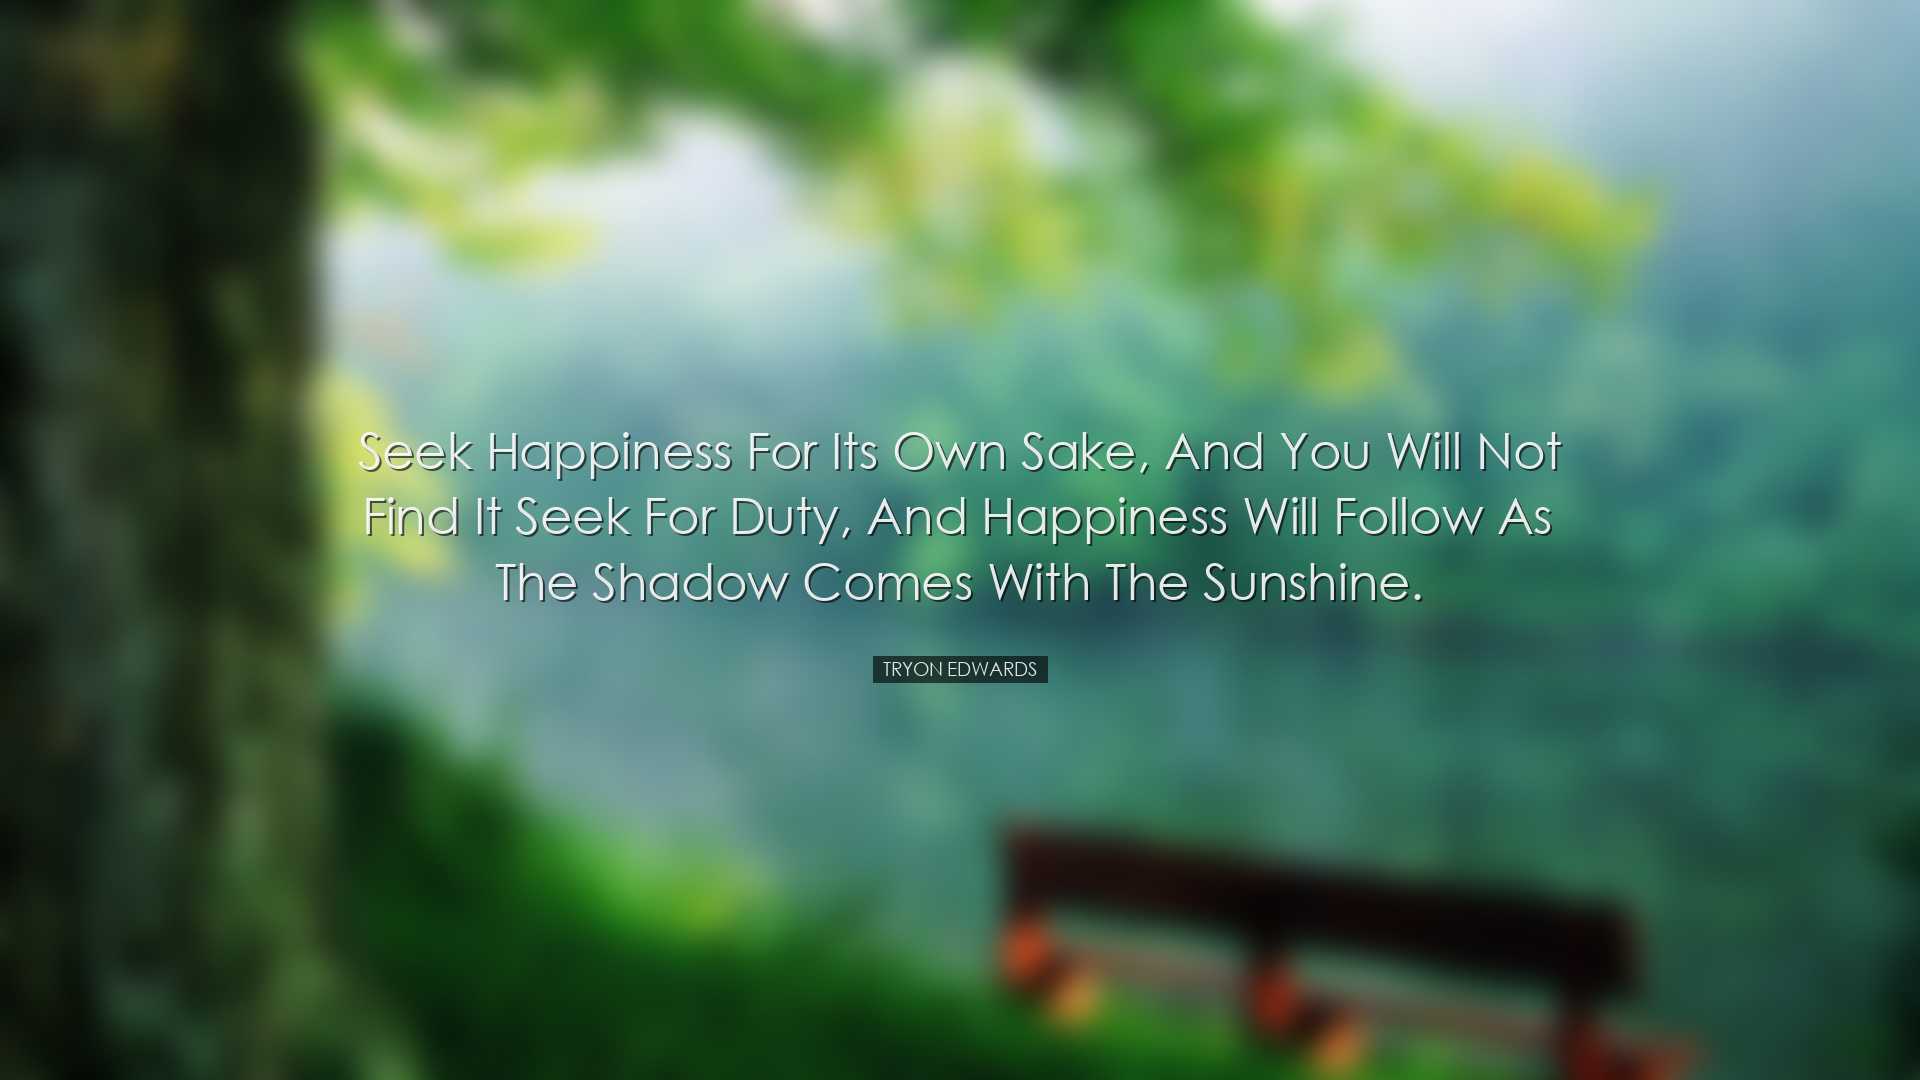 Seek happiness for its own sake, and you will not find it seek for